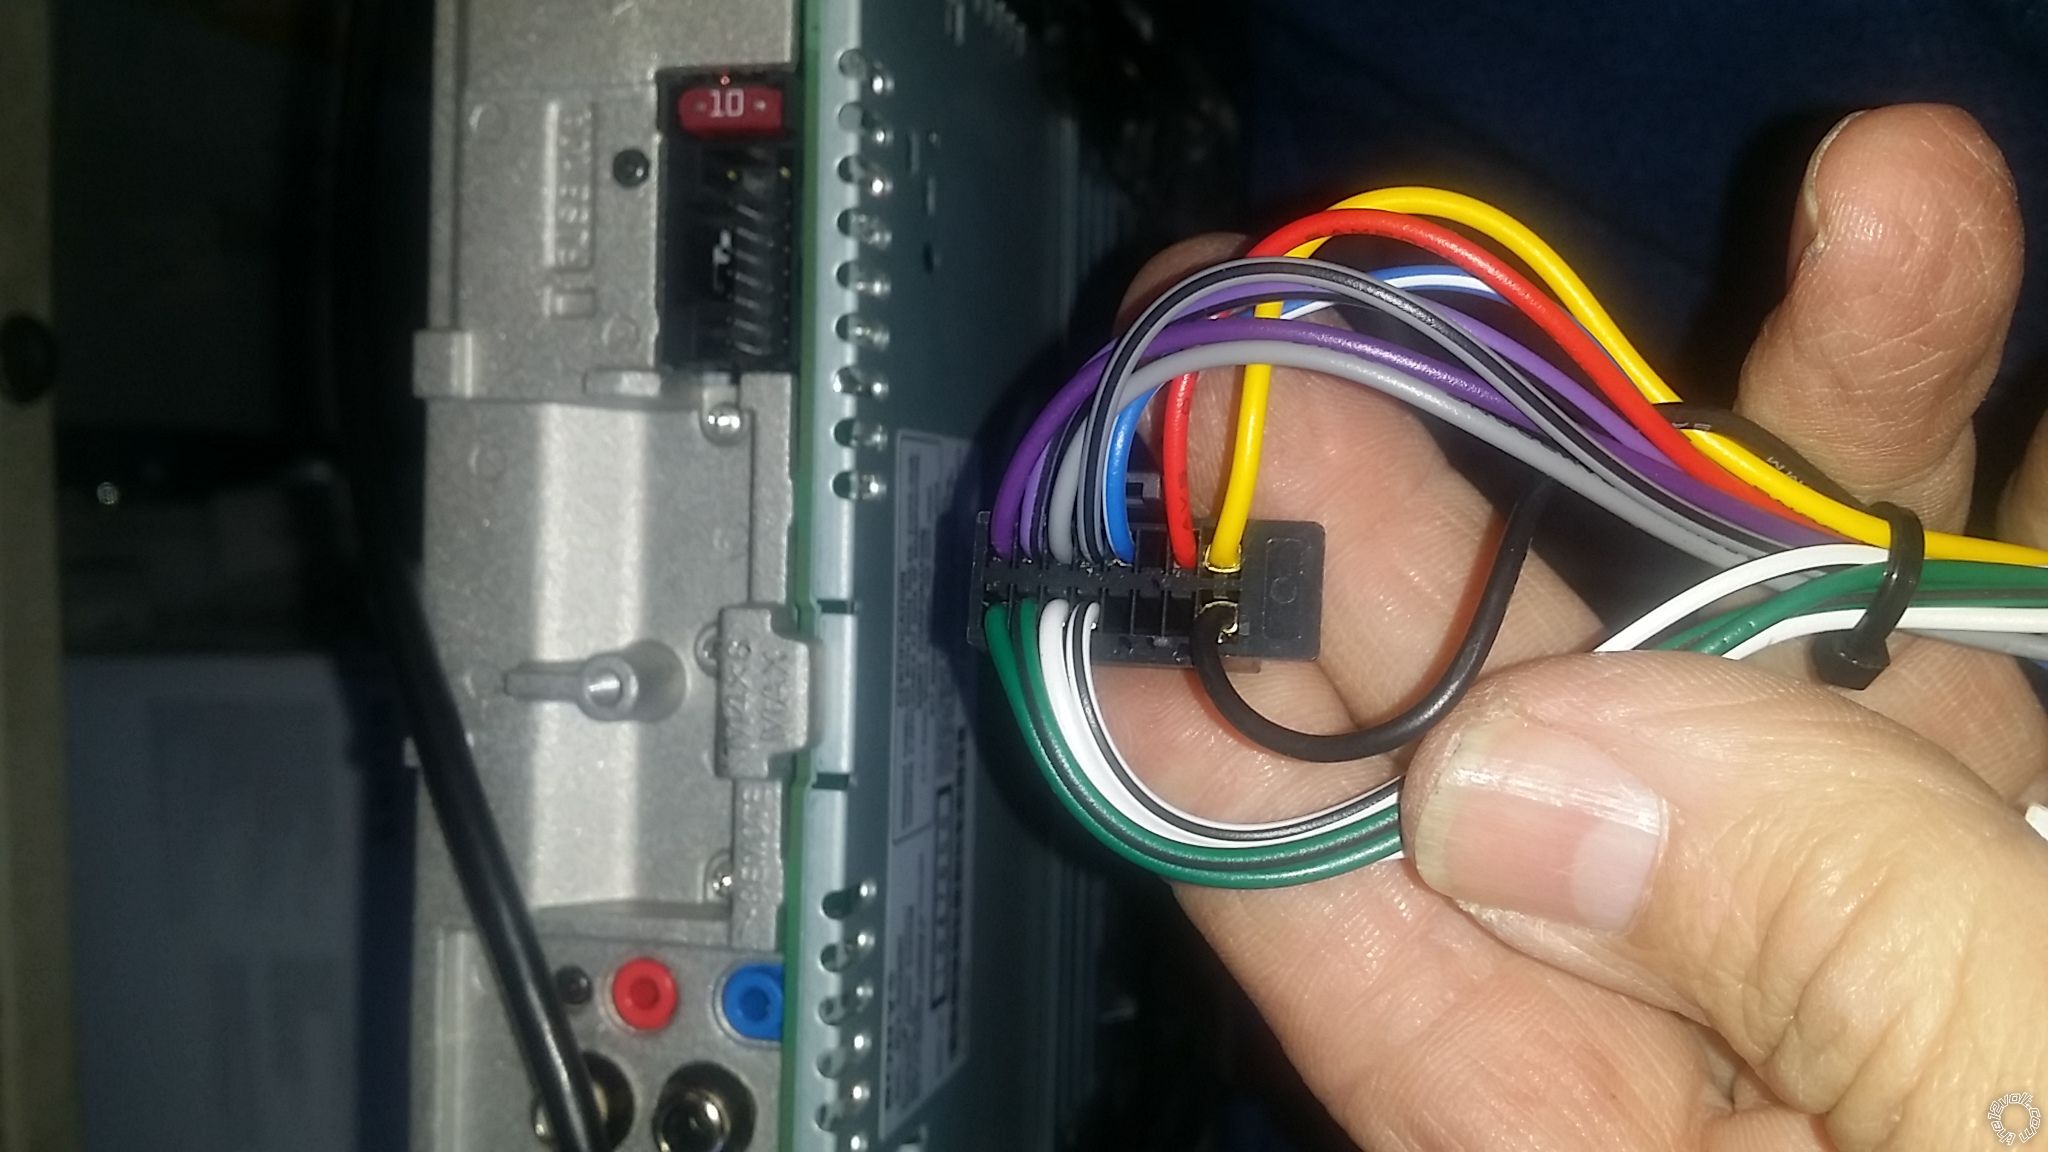 Sony MEX-N5300BT, Power Antenna Pin? -- posted image.